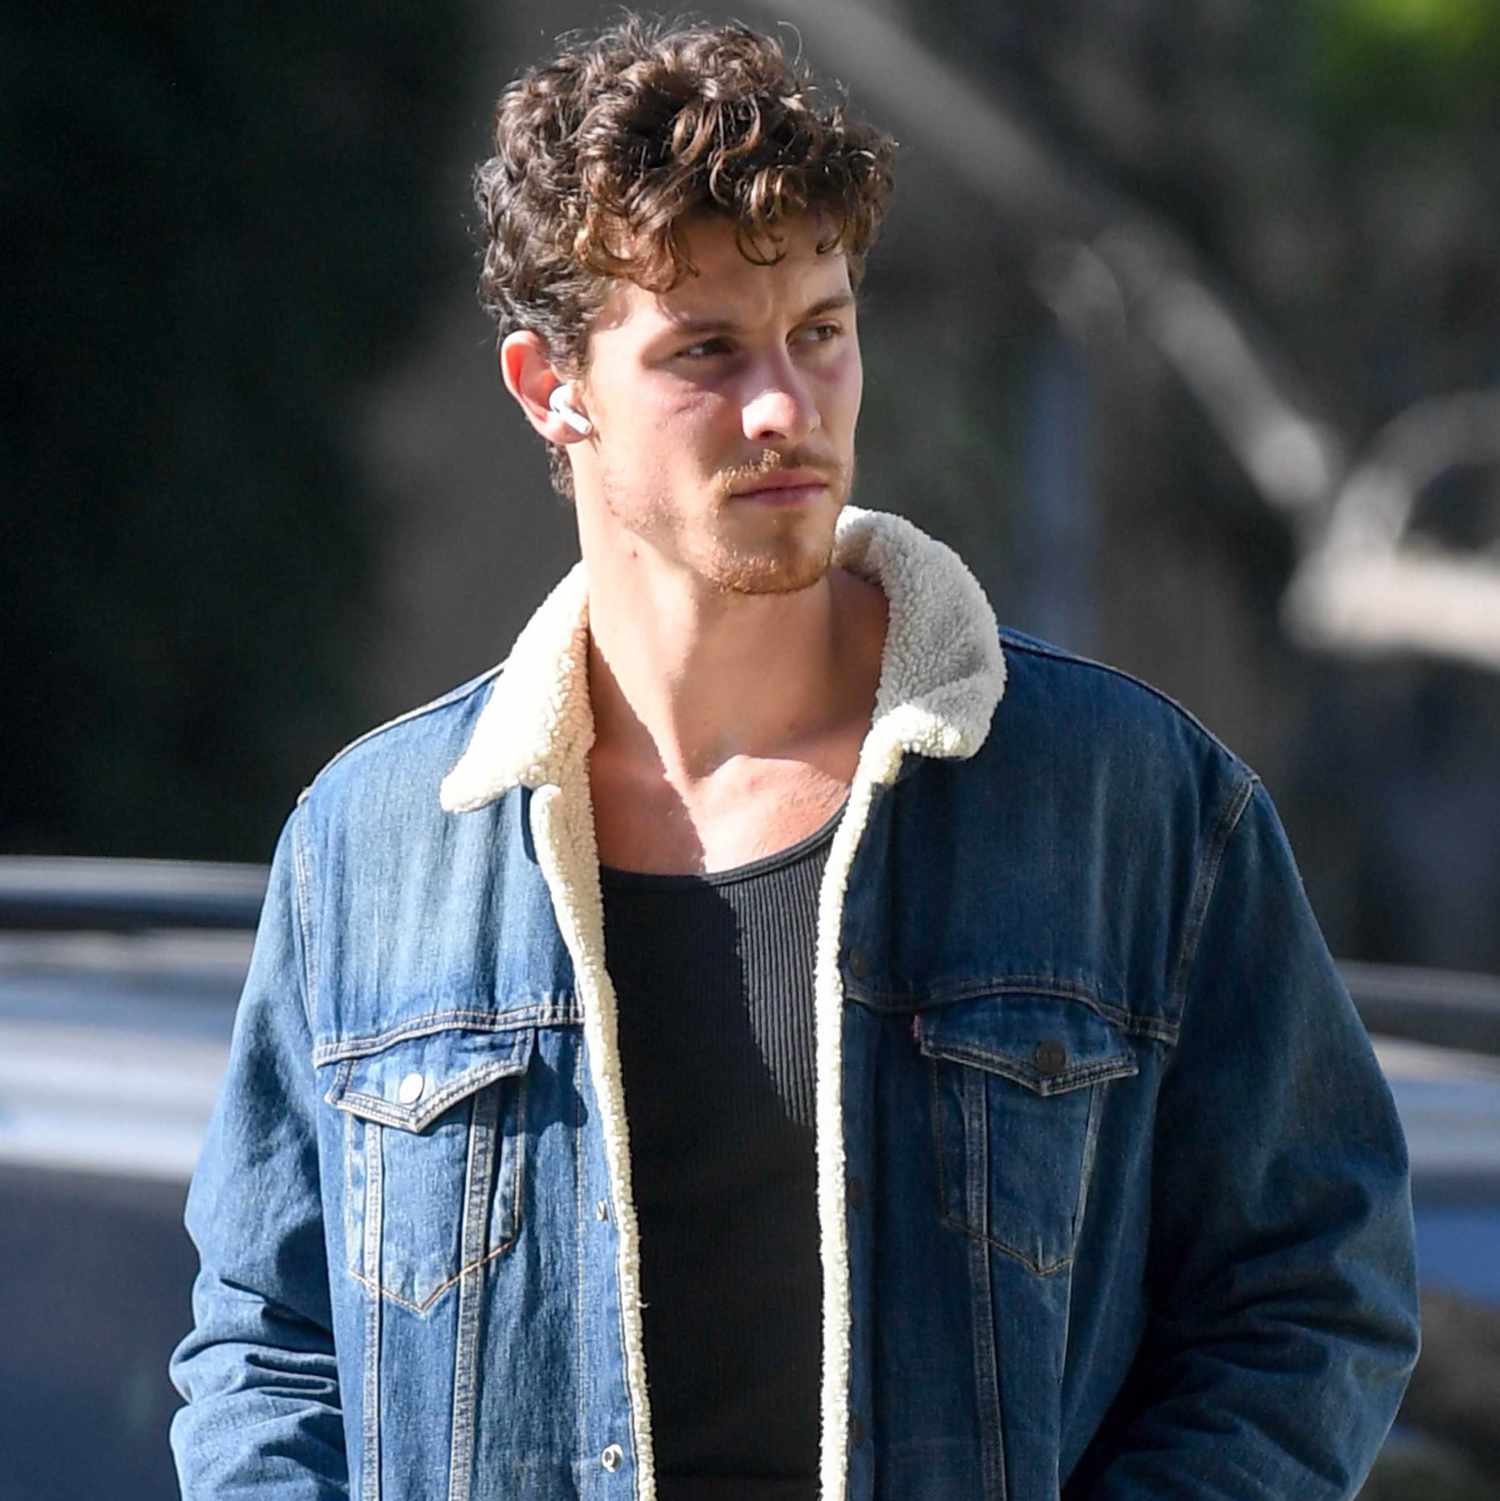 Shawn Mendes is spotted out for a stroll in Los Angeles. The Canadian singer wore a shearling lined denim jacket, black t-shirt, linen trousers, and Ugg slippers.